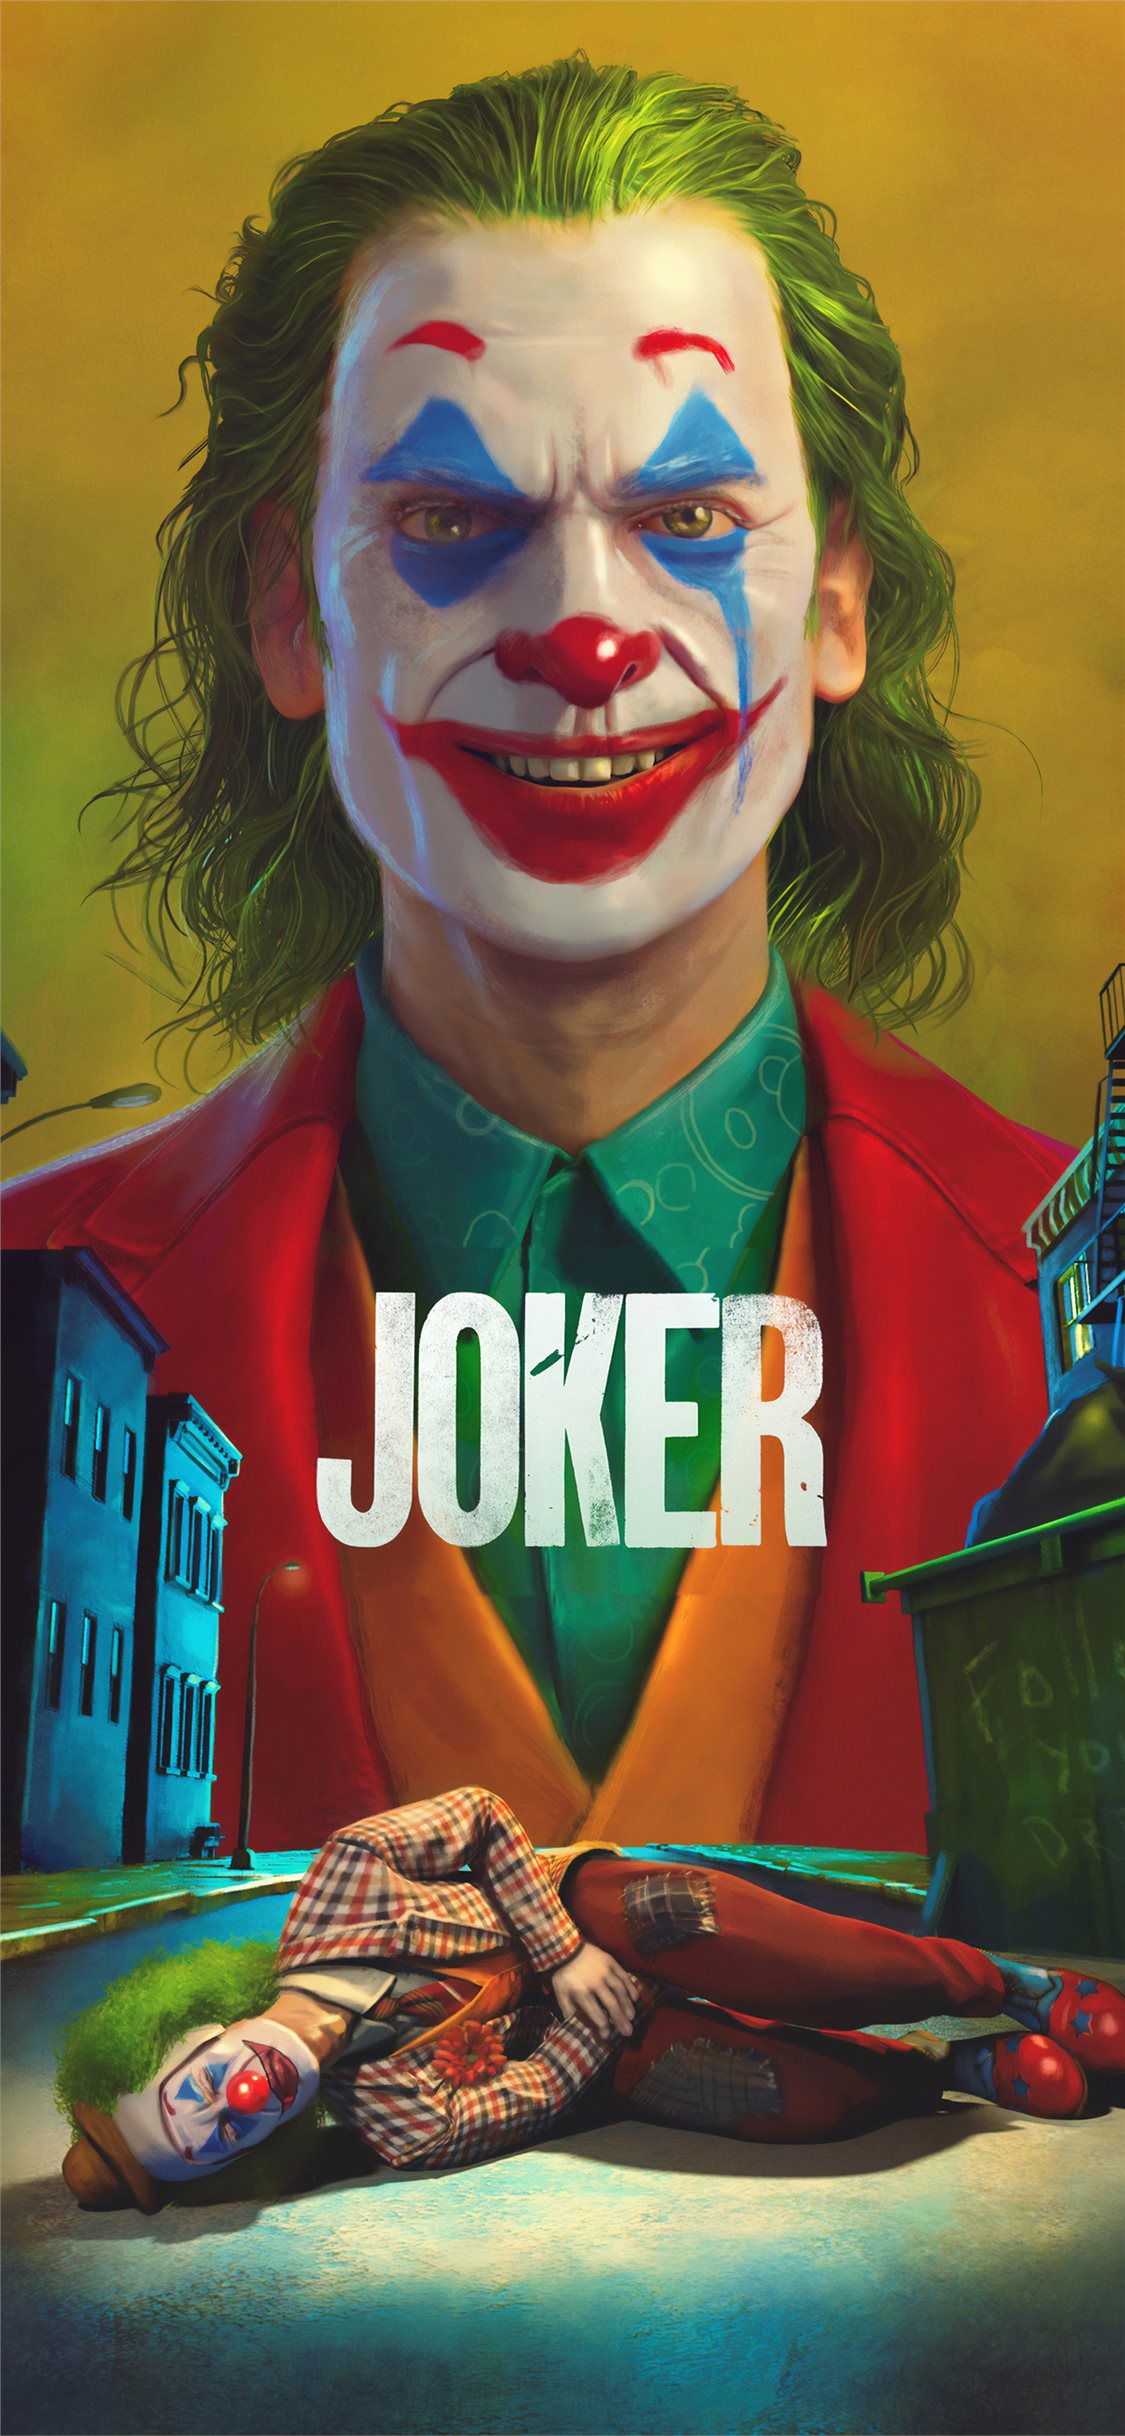 Joker download the last version for ios